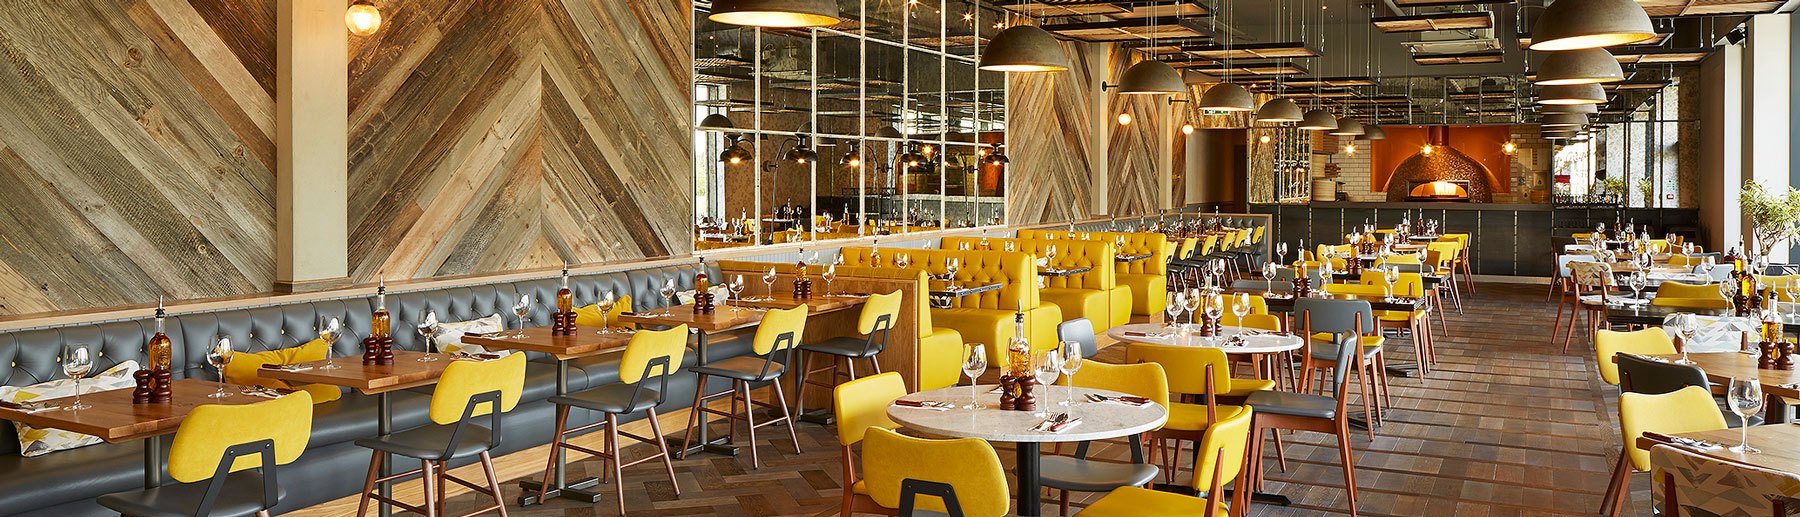 Wildwood Telford interior: Vibrant yellow chairs accentuate the space, with the pizza oven visible in the background